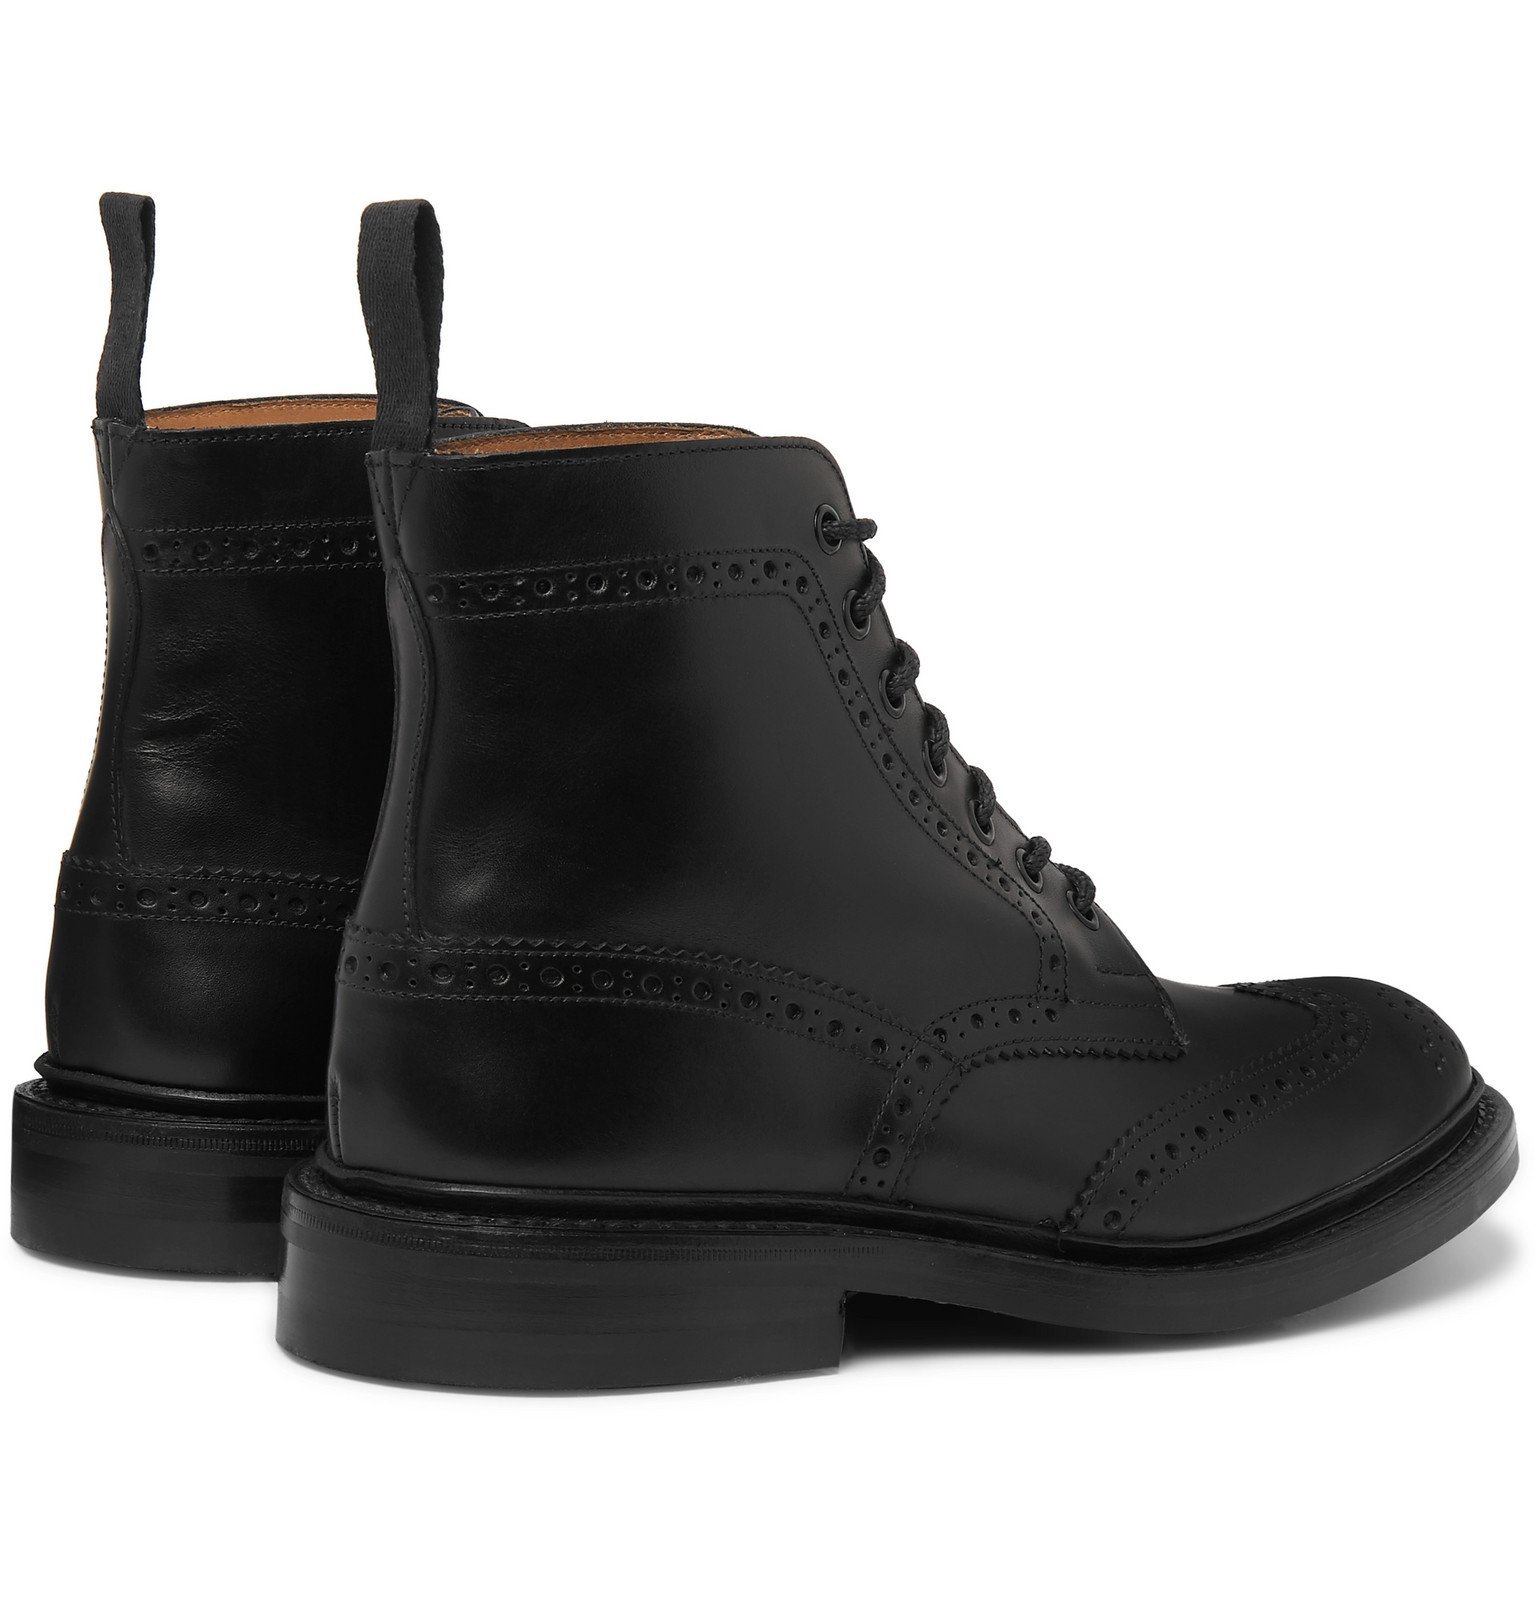 Tricker's - Stow Full-Grain Leather Brogue Boots - Black Tricker's